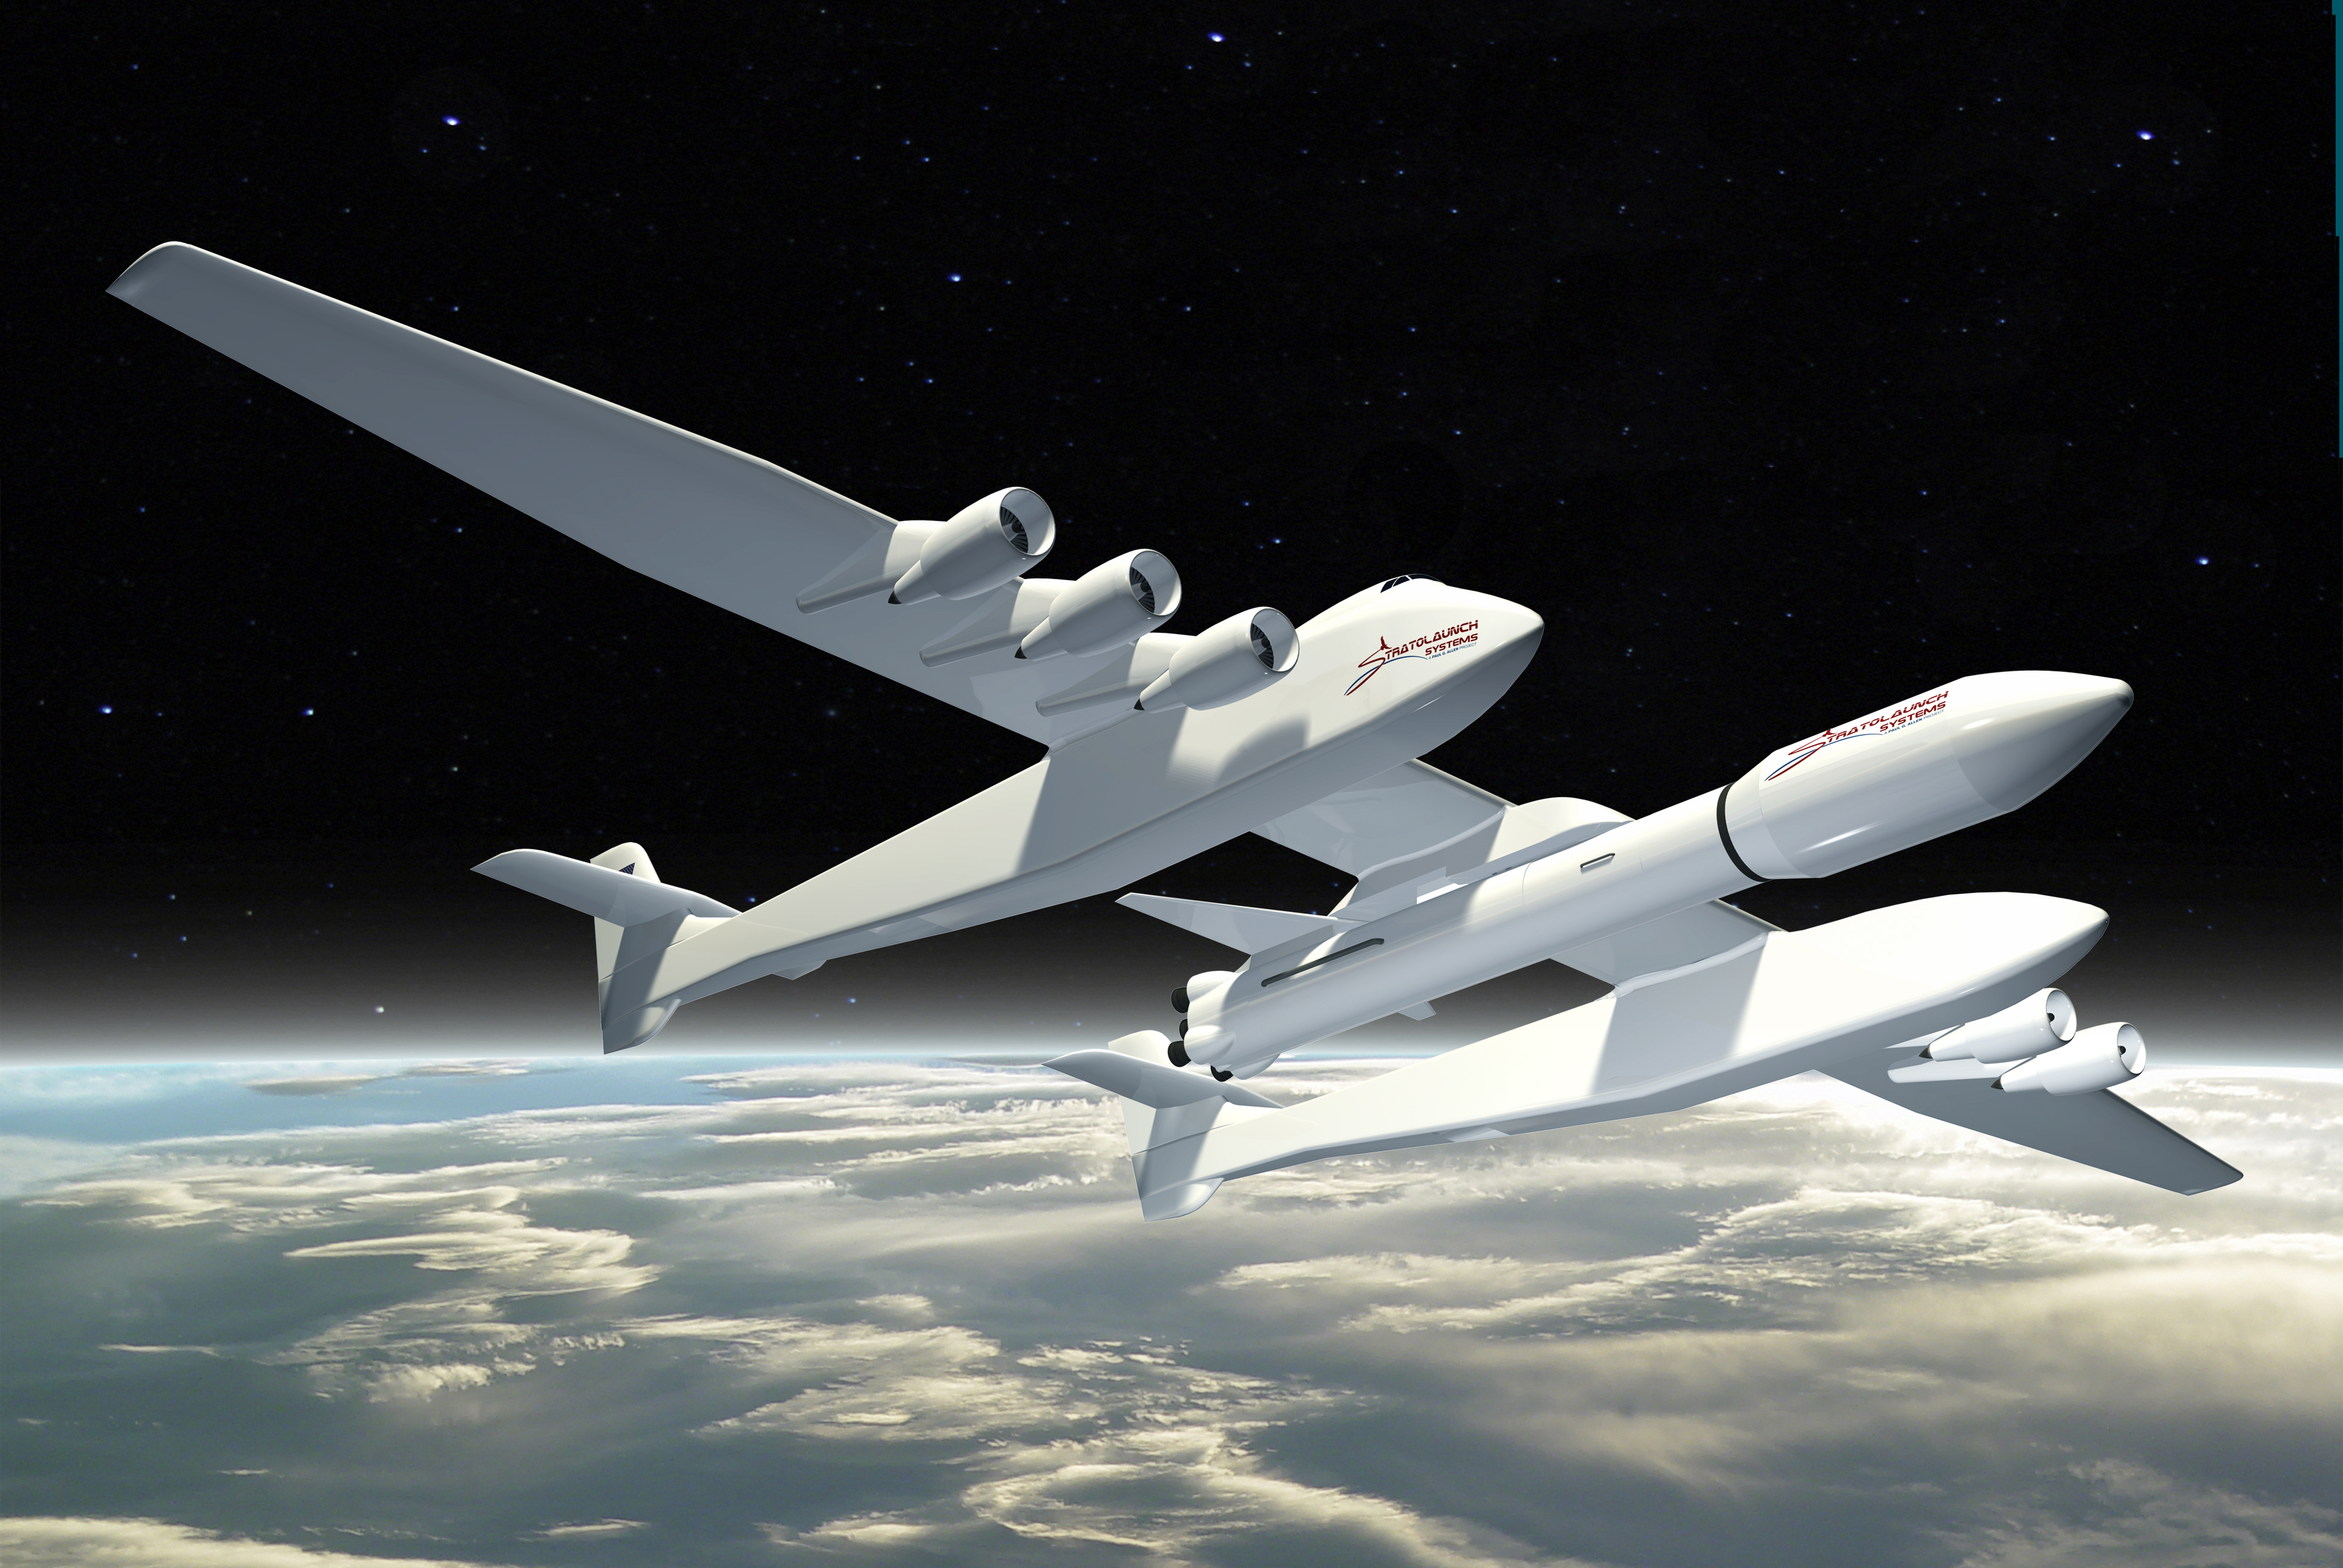 stratolaunch-systems-plane.jpg